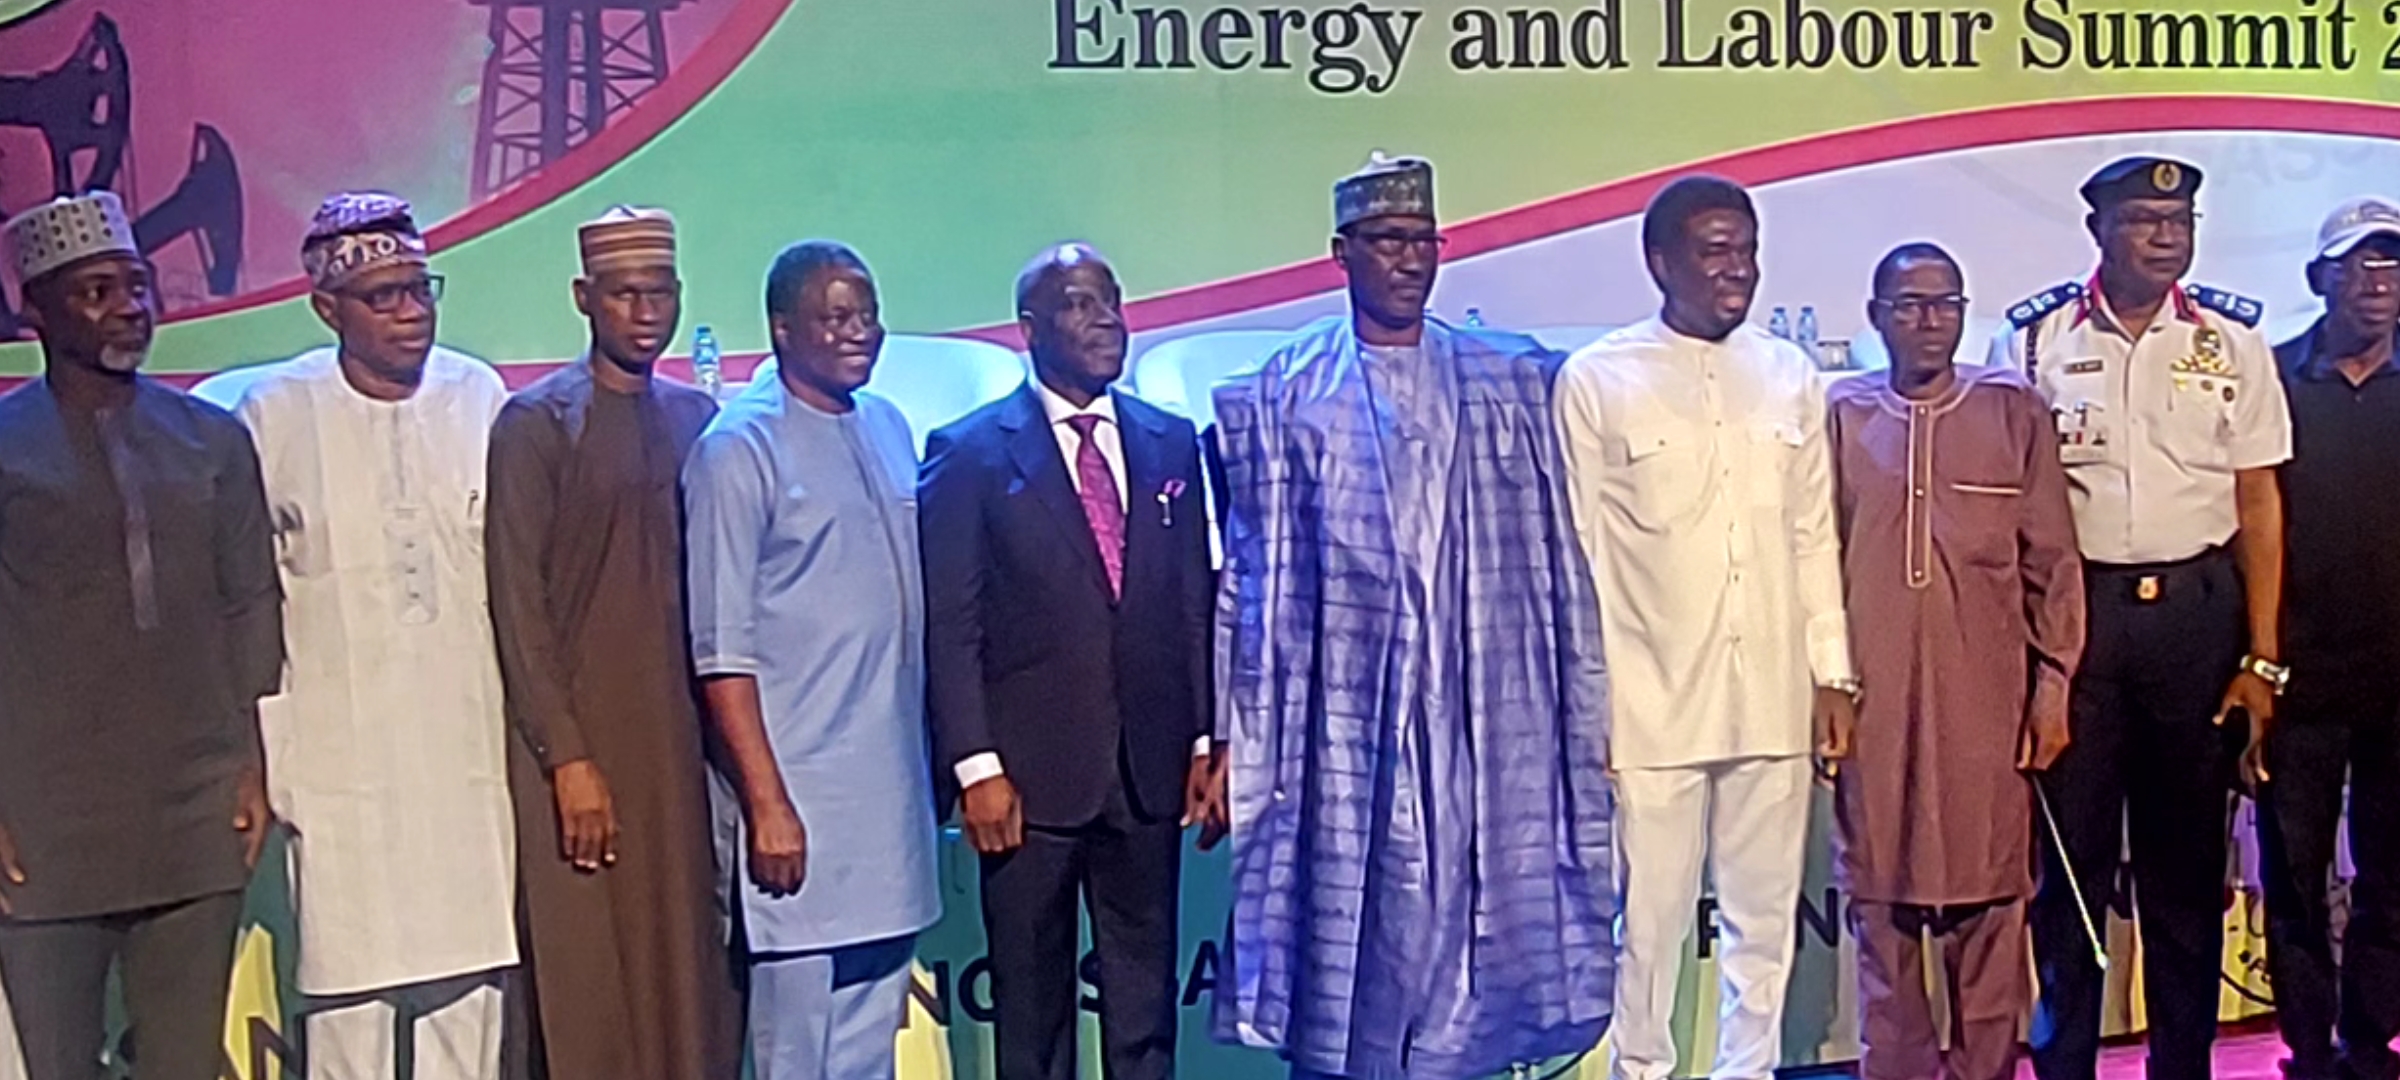 NUPRC Chief Executive Engr Gbenga Komolafe, delivers keynote speech on the theme “Energy Transition: Positioning the Nigeria Energy Industry for the future (Upstream Perspective)” at the ongoing Petroleum and Natural Gas Senior Staff Association of Nigeria (PENGASSAN) Energy and Labour Summit 2022 taking place at  Transcorp Hilton Hotel, Abuja.